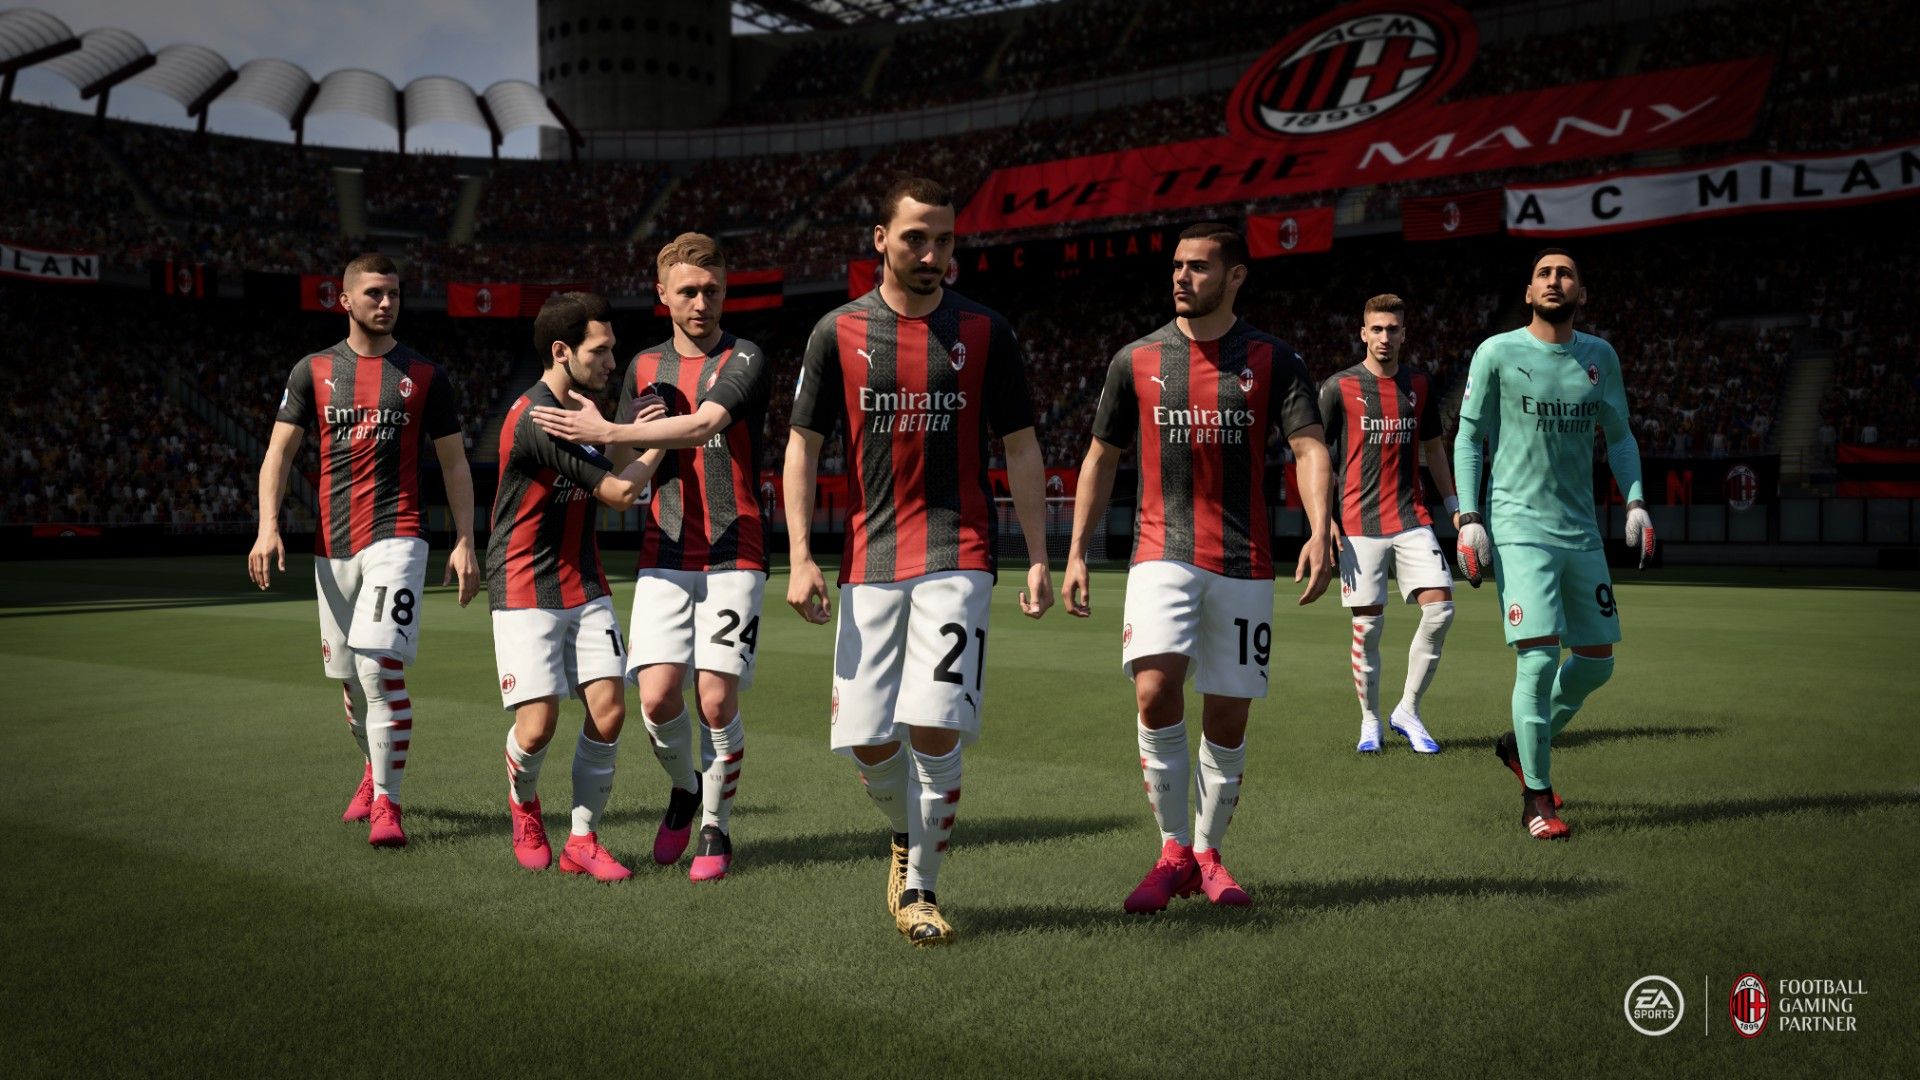 FIFA 21 Picks Two Massive Italian Licenses With A.C. Milan and Inter Milan